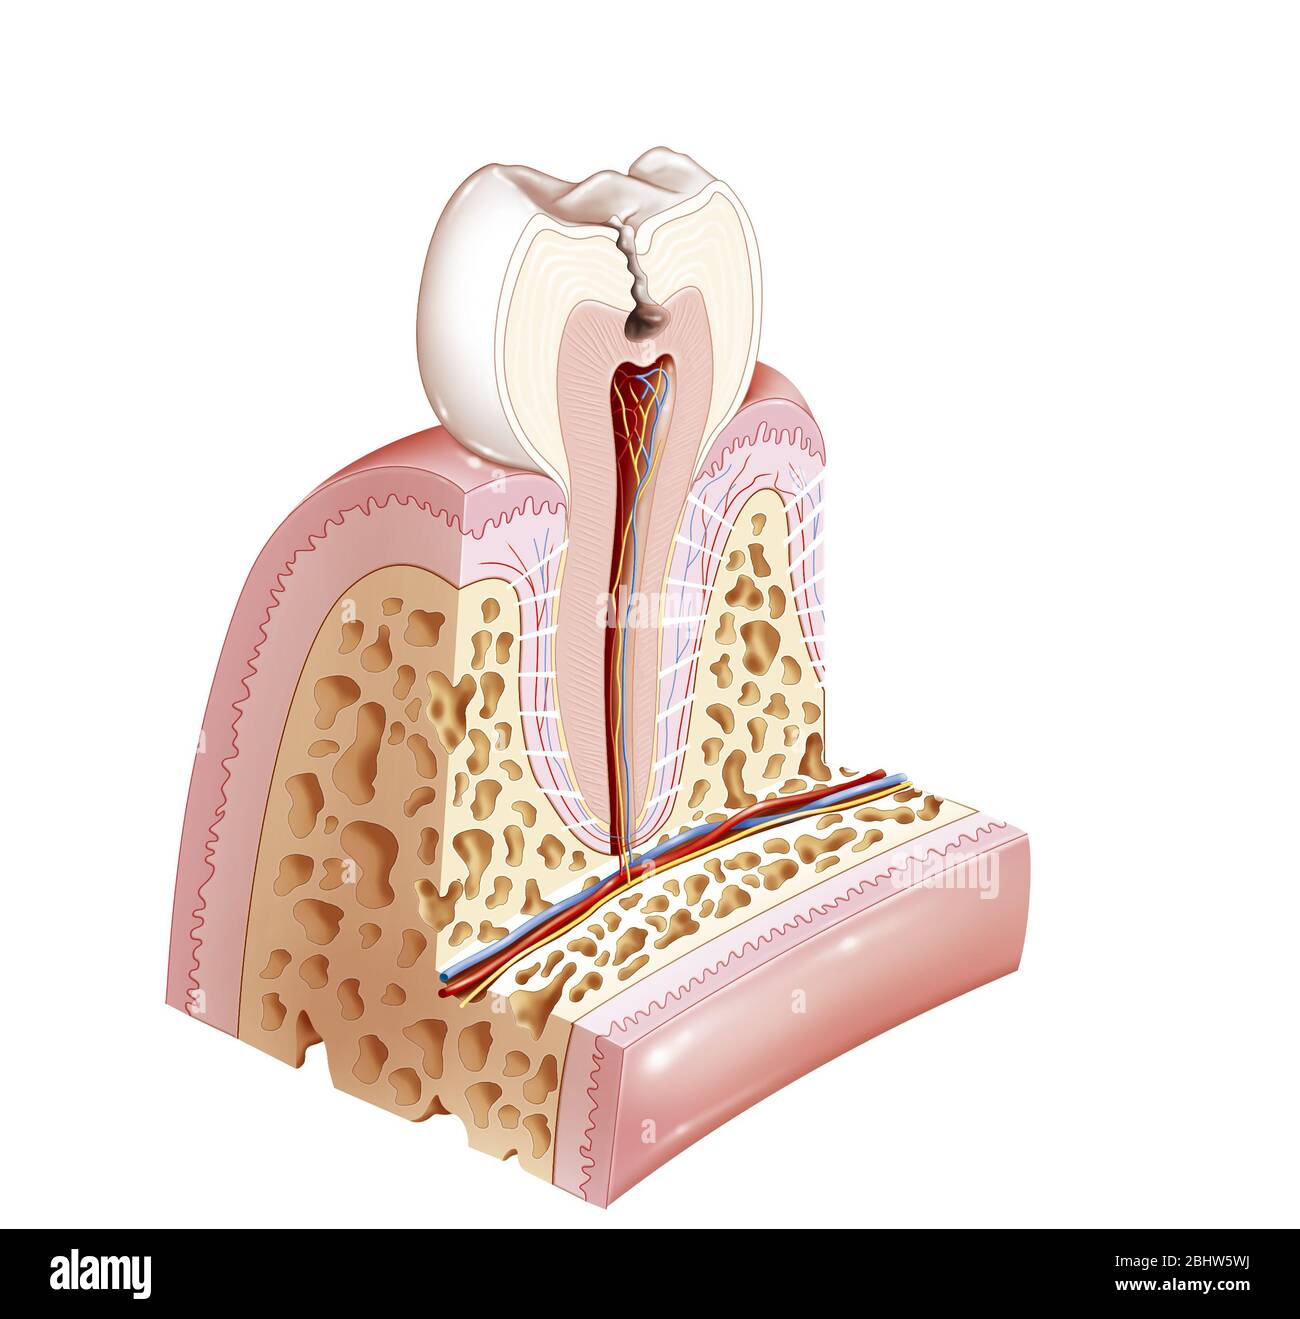 Decayed tooth with dentin damage. Dentin is the area shown in pinkish beige. Here we are in stage 2 of the tooth being affected by tooth decay. This i Stock Photo